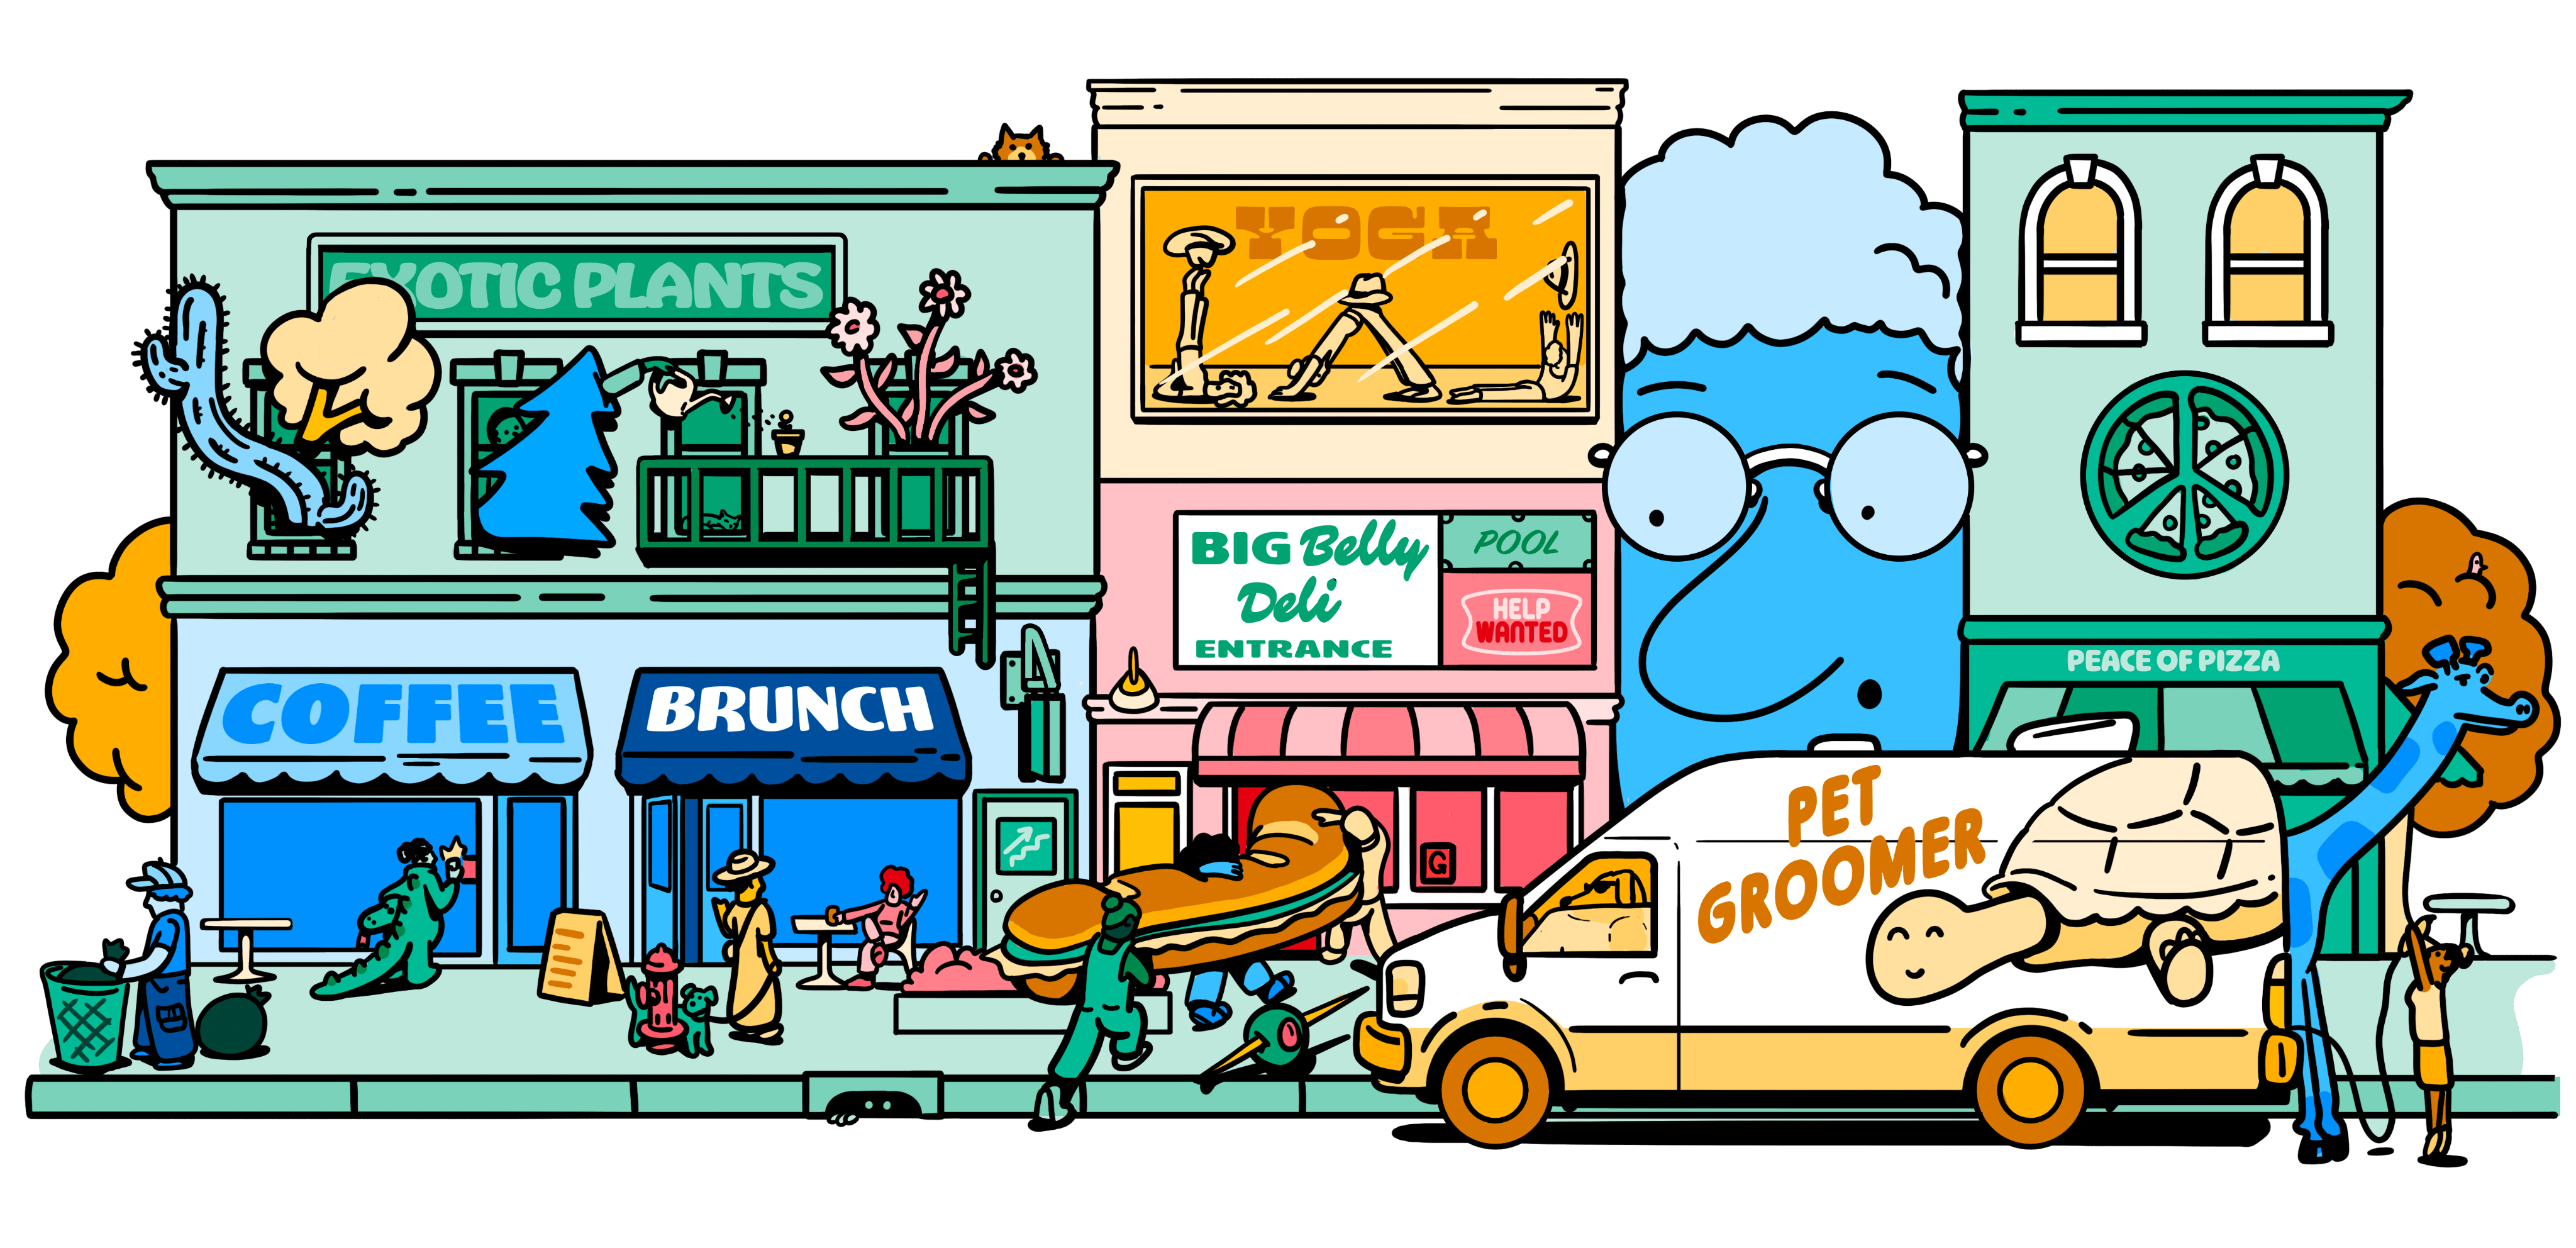 A bustling city street in a comic book world. Workers are carrying a giant sandwich into a deli. A massive grandma is watching from behind a pizza restaurant. A giraffe is sticking out the back of a pet groomer's van.